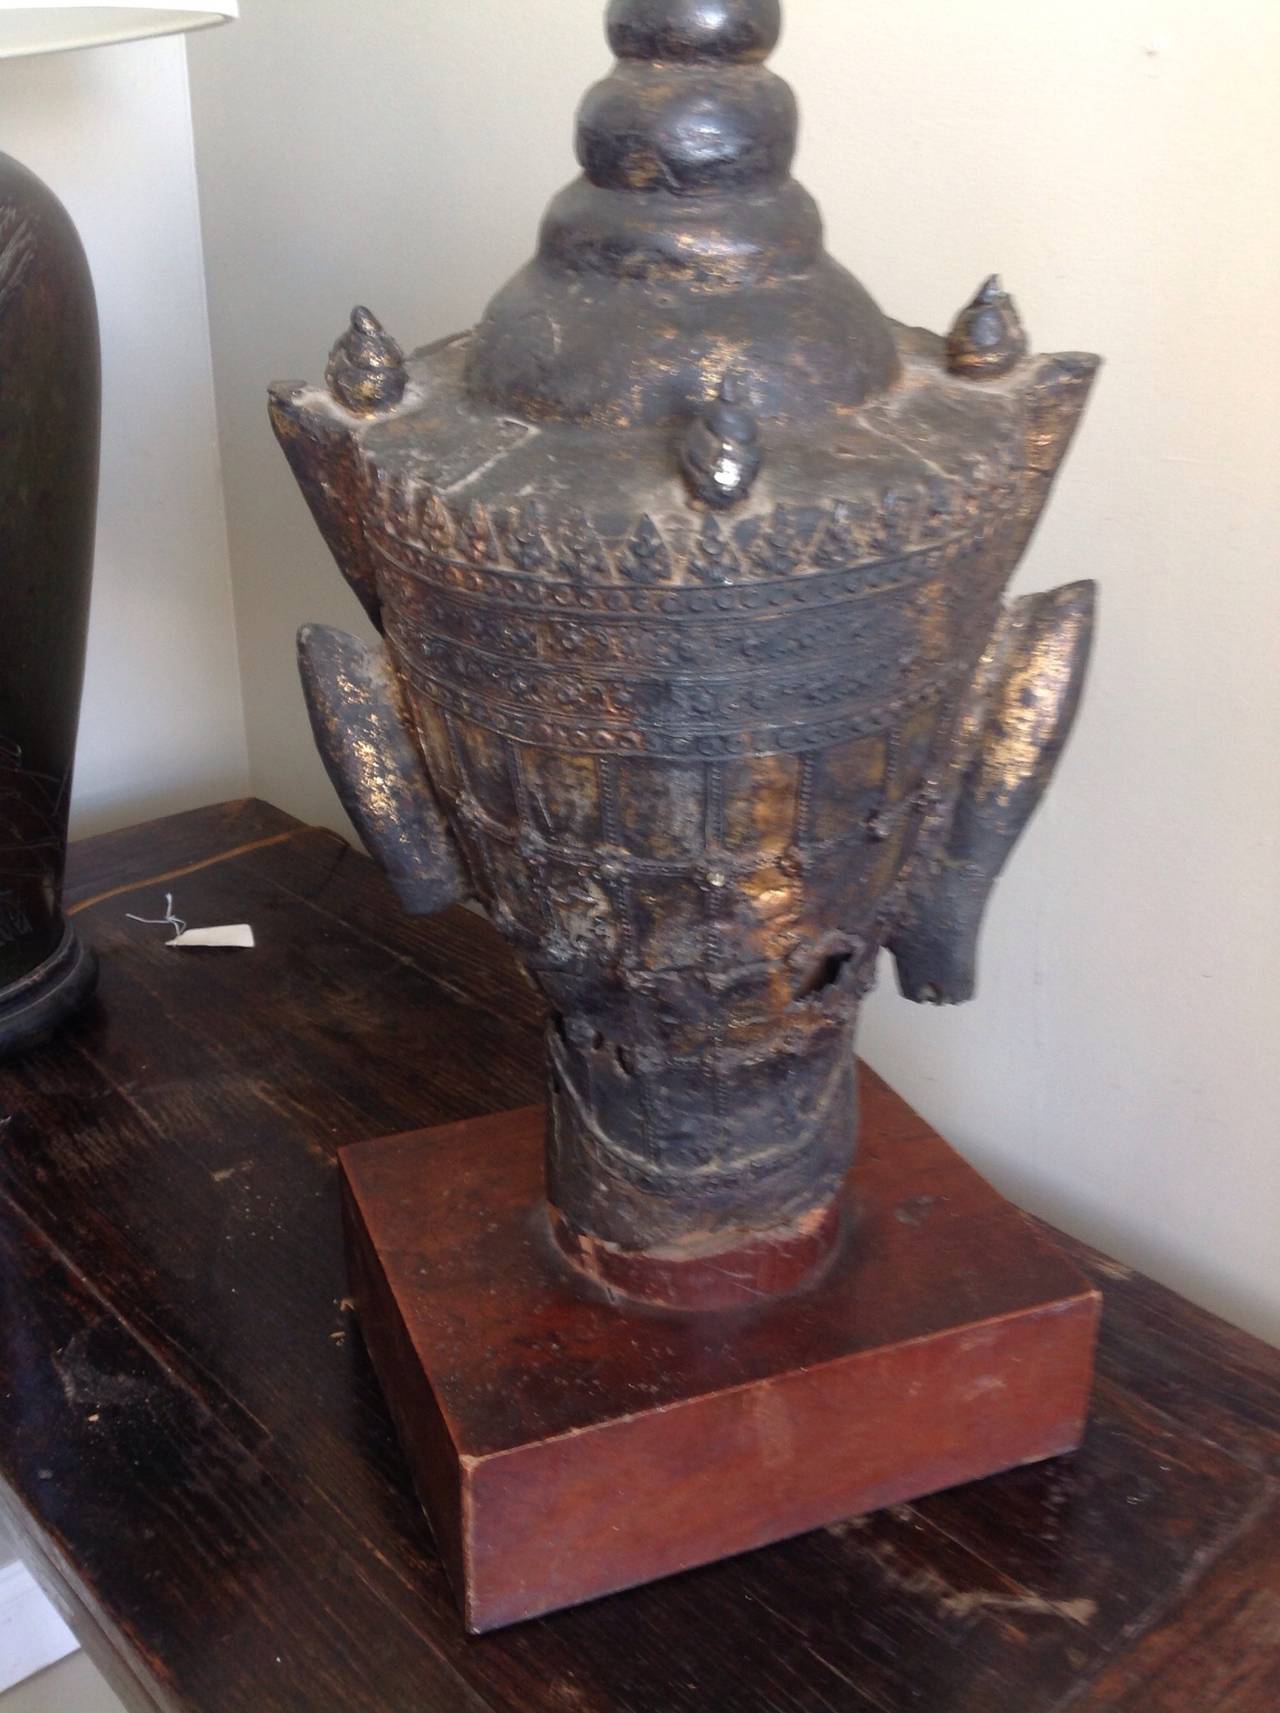 Rare Ayutthaya Period Bronze Buddha Head In Distressed Condition For Sale In Sleepy Hollow, NY